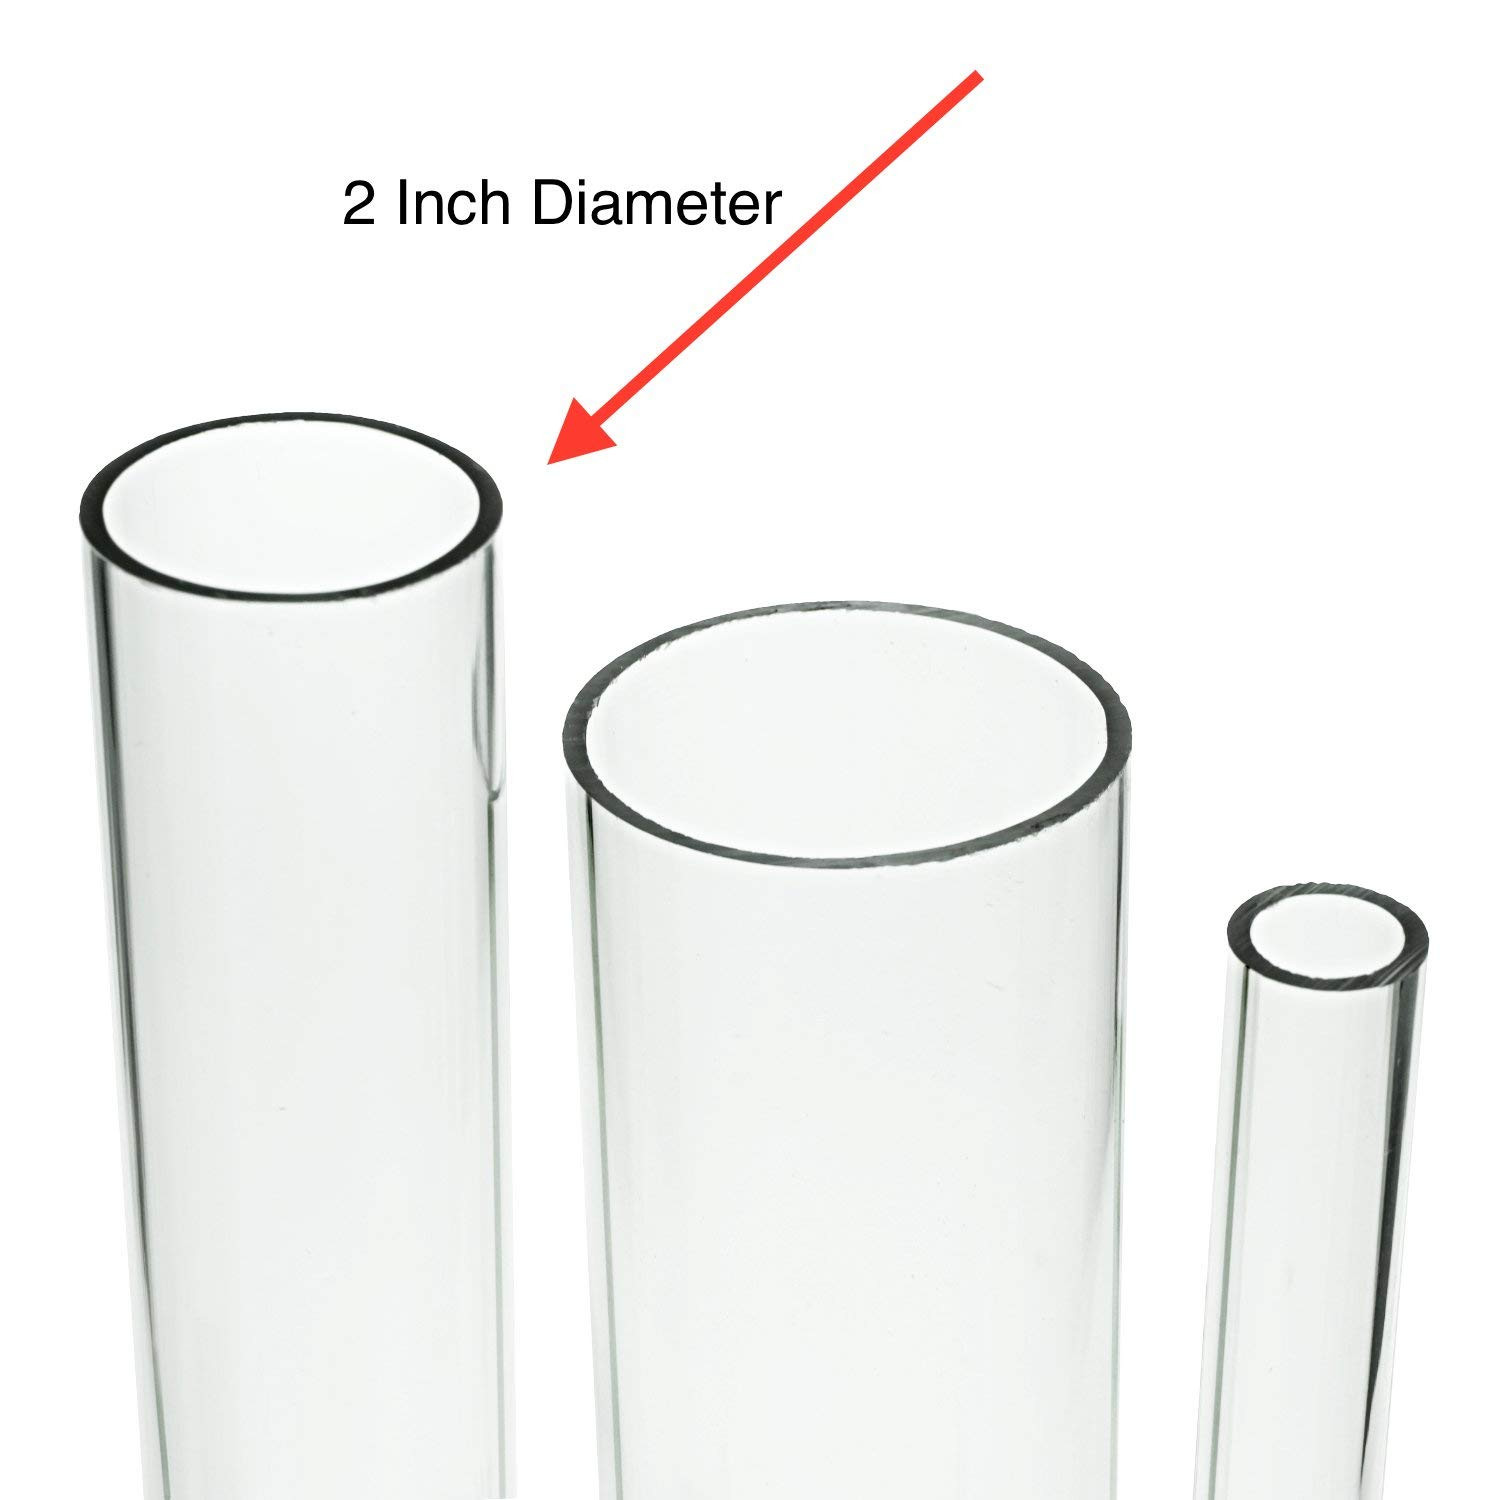 16 inch cylinder vases of amazon com source one deluxe clear acrylic tube 2 inches thick 12 pertaining to amazon com source one deluxe clear acrylic tube 2 inches thick 12 inch 2 inch wide office products